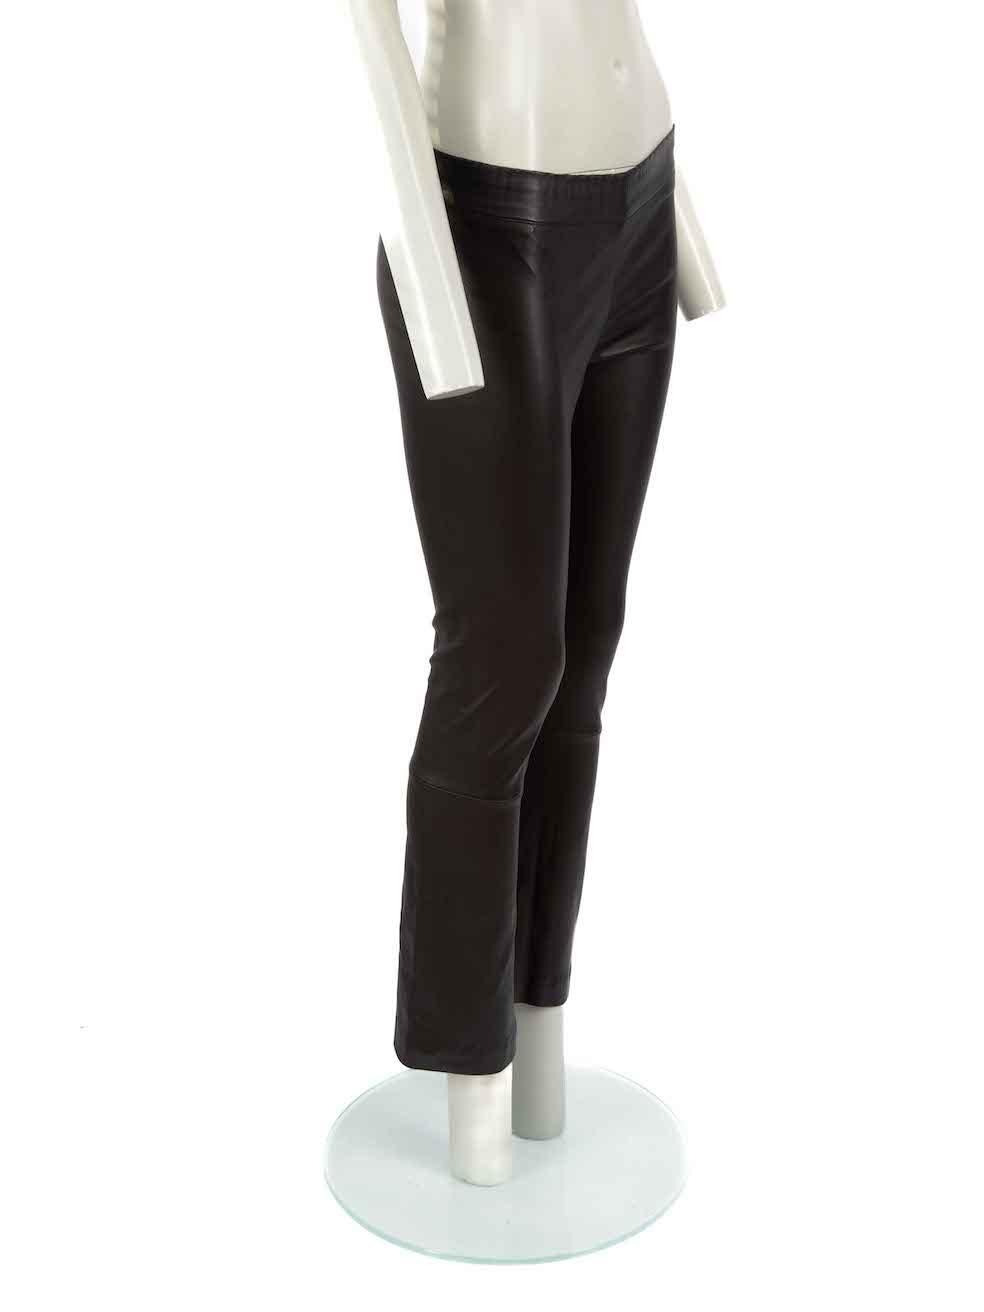 CONDITION is Very good. Hardly any visible wear to trousers is evident on this used The Row designer resale item.
 
 Details
 Black
 Leather
 Bootcut trousers
 Mid rise
 Elasticated waistband
 
 
 Made in USA
 
 Composition
 100% Lambskin
 
 Care